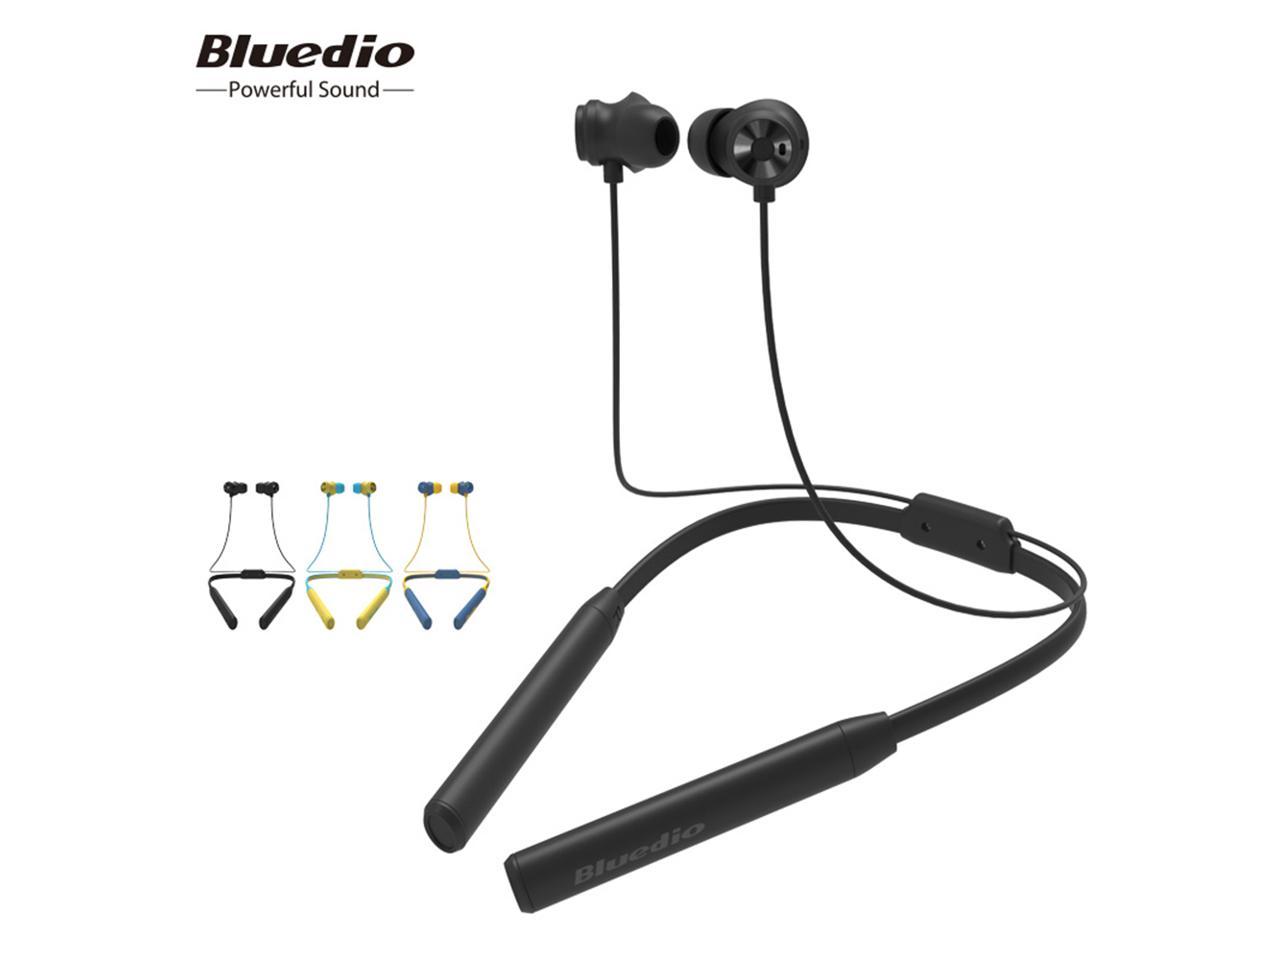 Bluedio TN2 Sports Bluetooth Earphone Active Noise Canceling Wireless Earbuds Stereo Headphone Sports Headset Neckband for Smart Phone IOS/Android